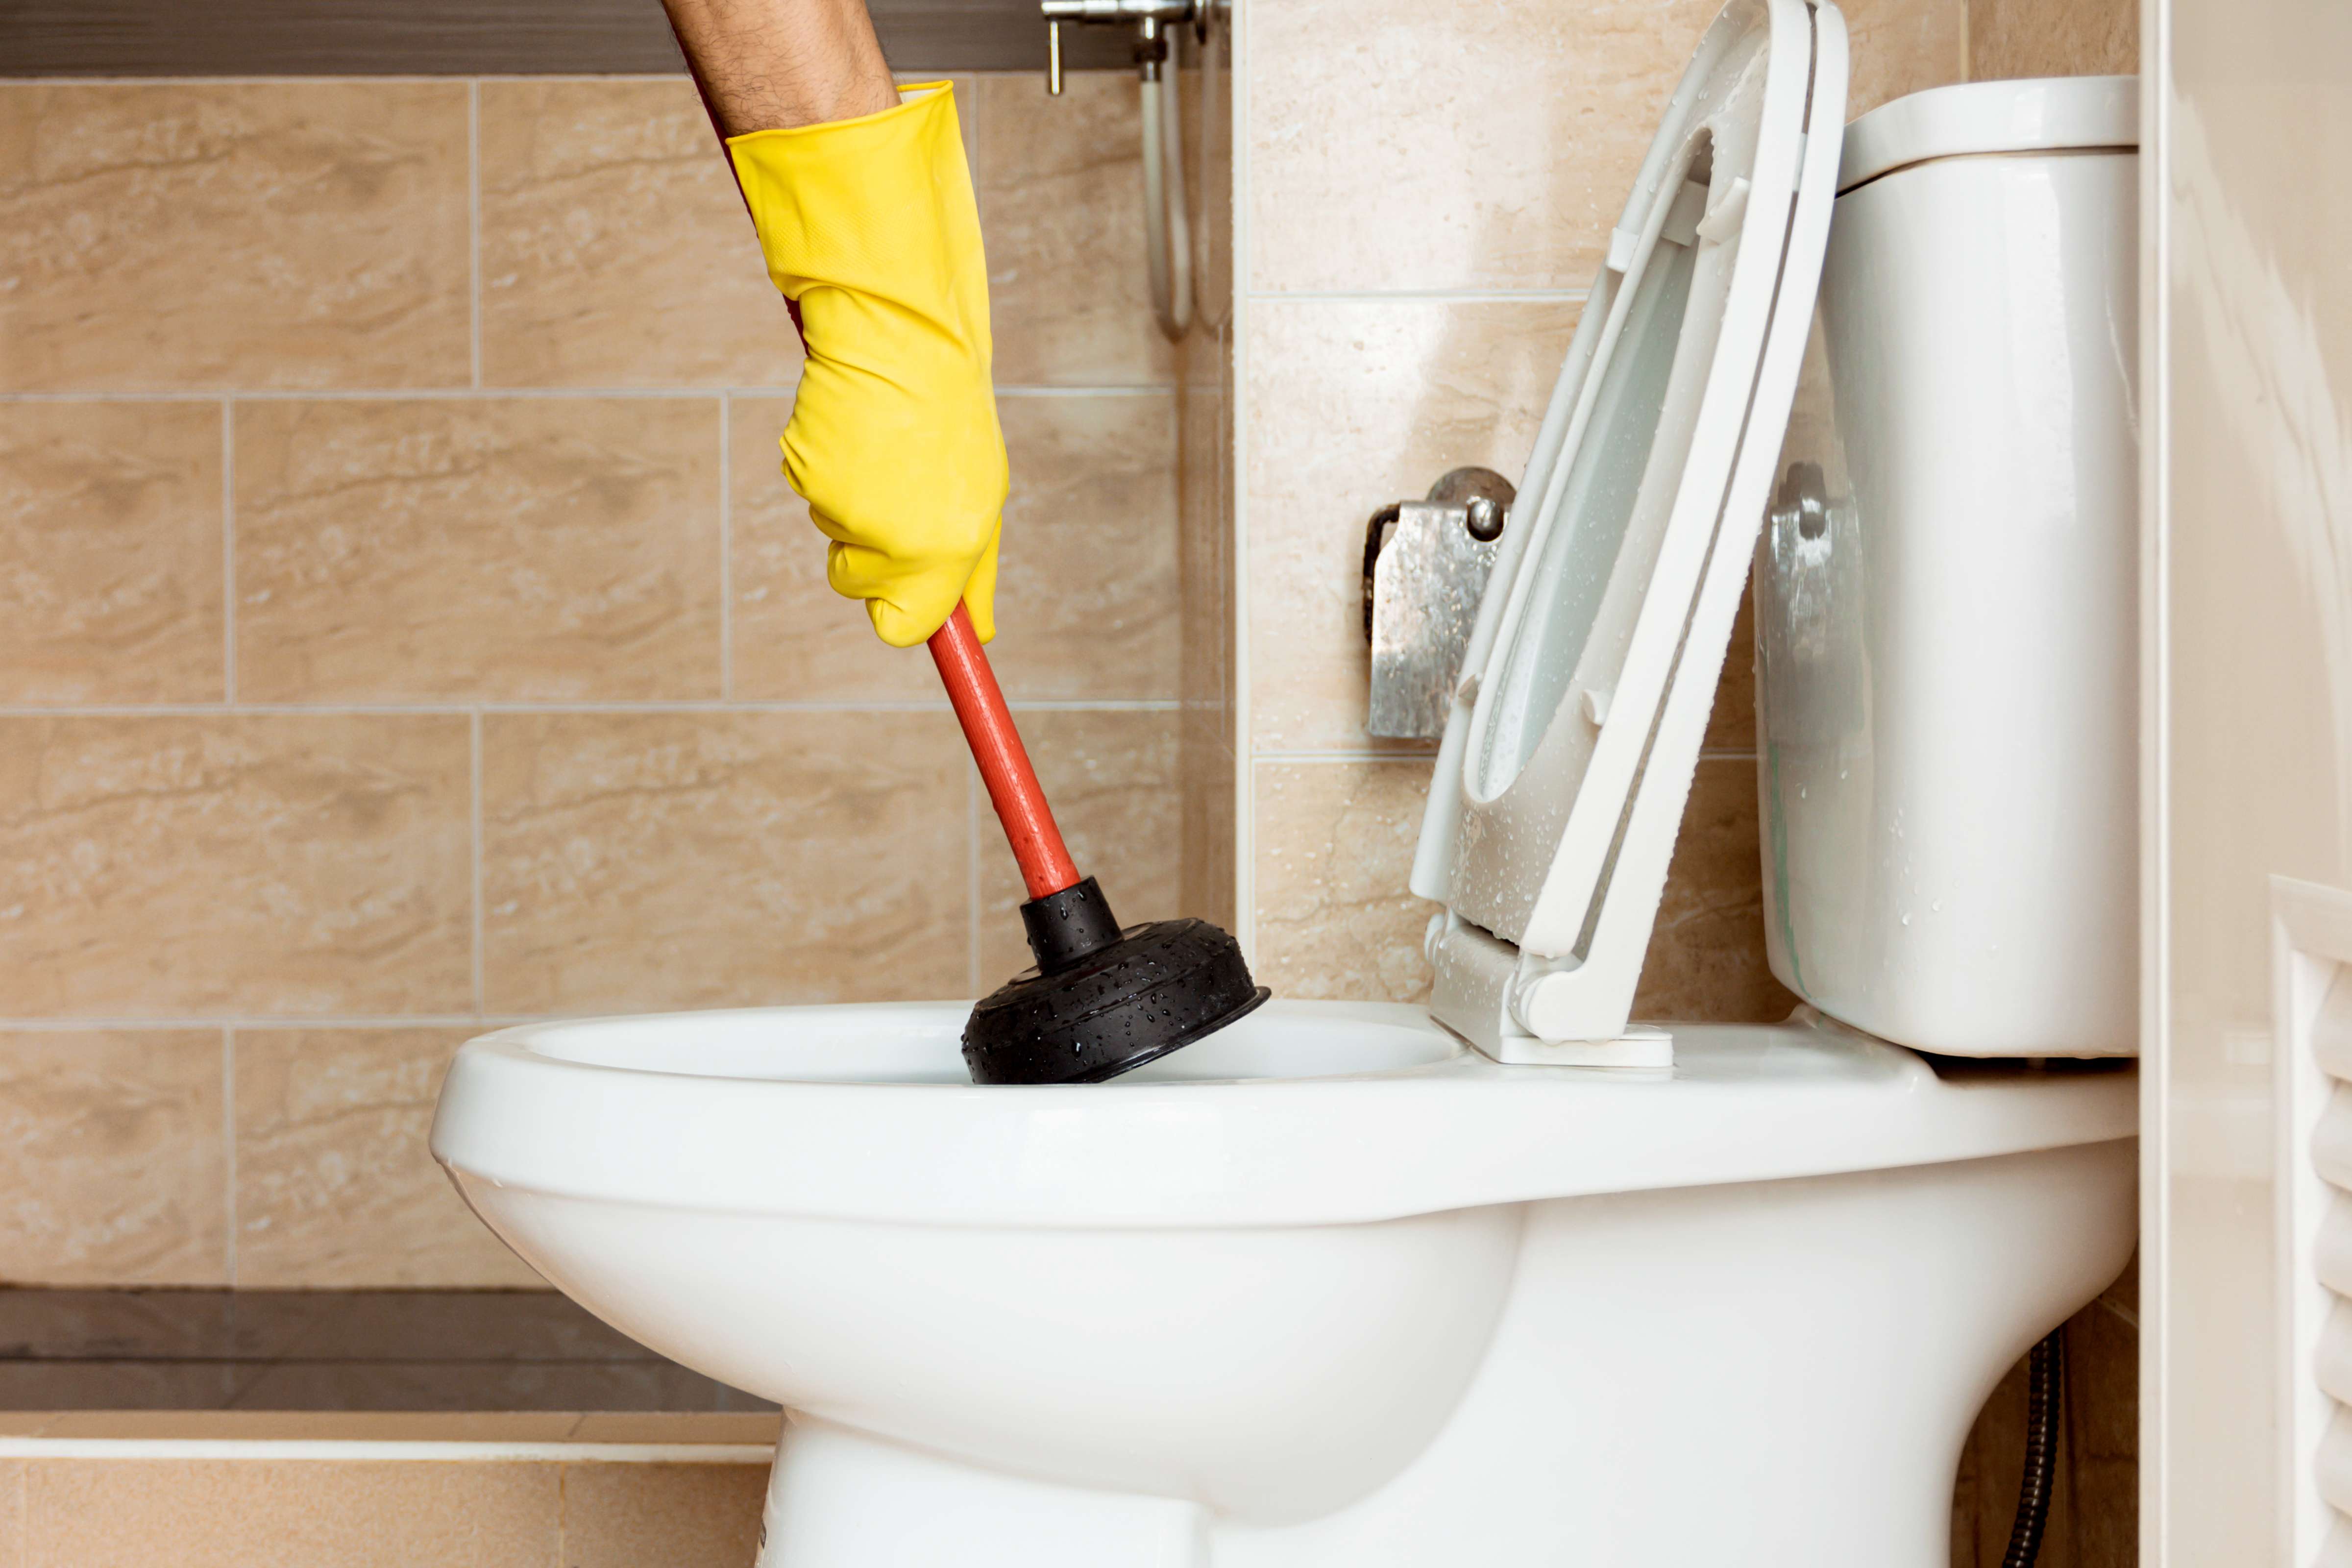 15 Common Causes and Tips of a Clogged Drain - Happy Hiller